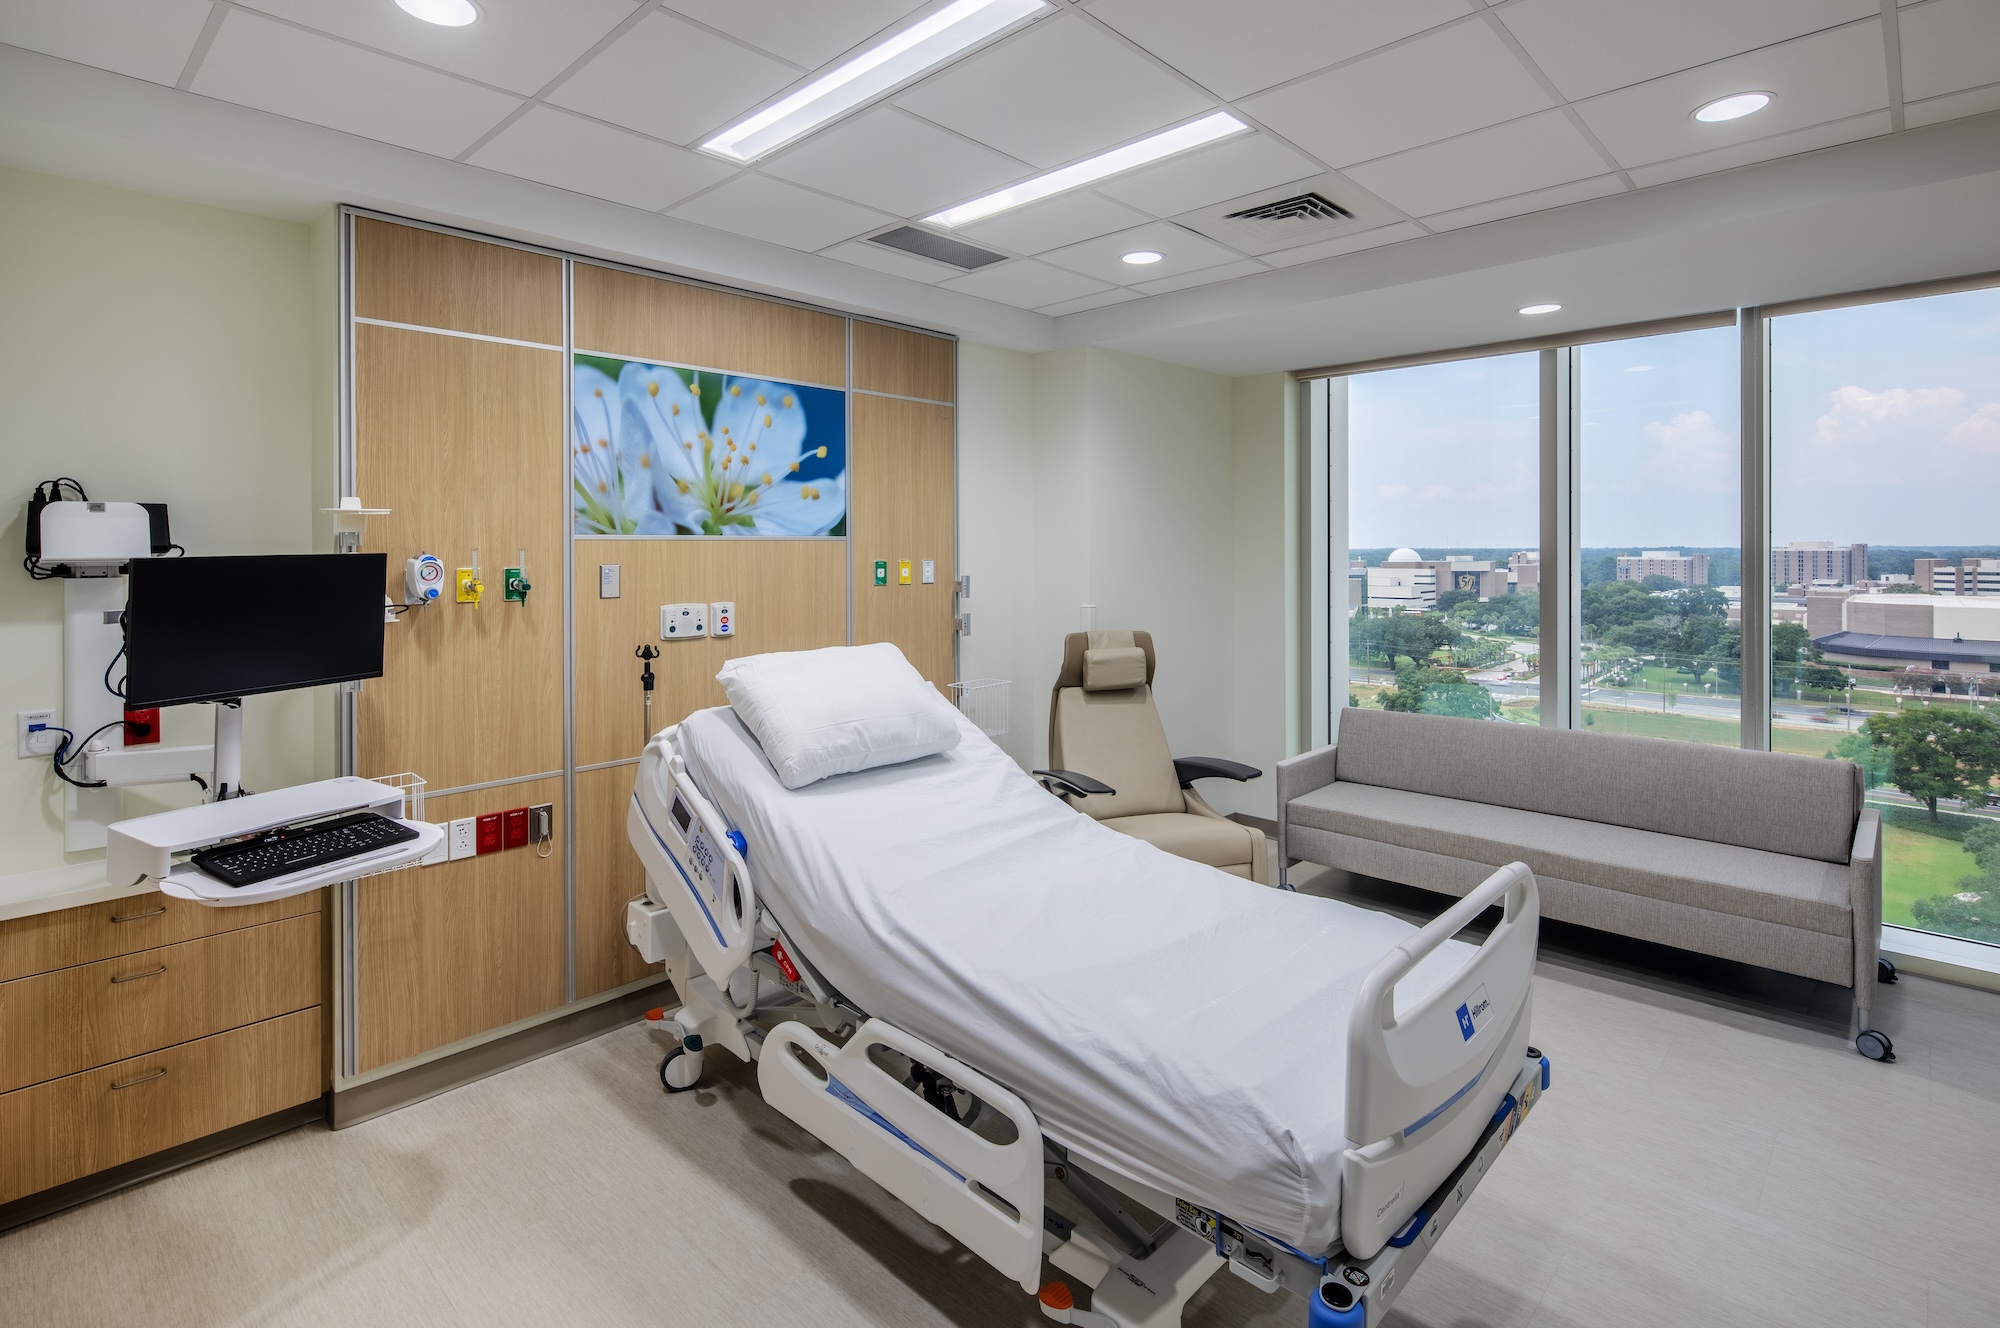 New $650 million Baptist Health Care complex opens in Pensacola